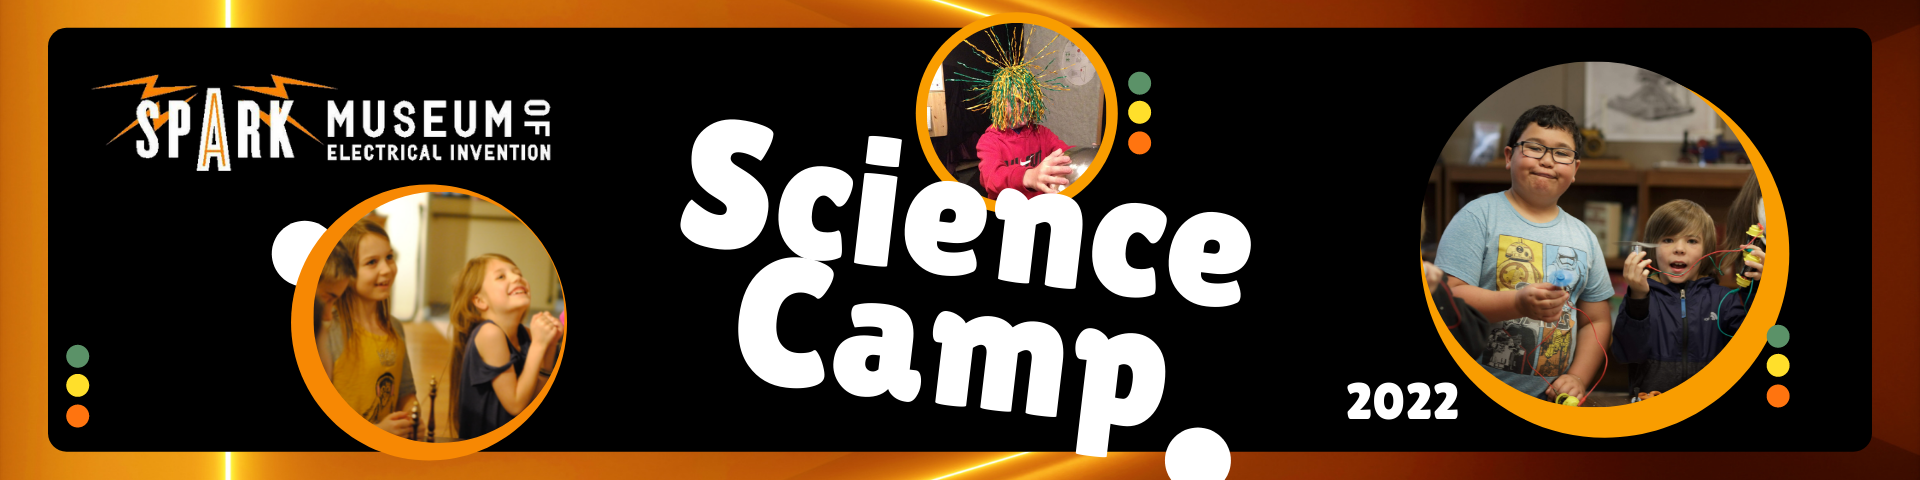 Science Camp at SPARK! (Session 1)